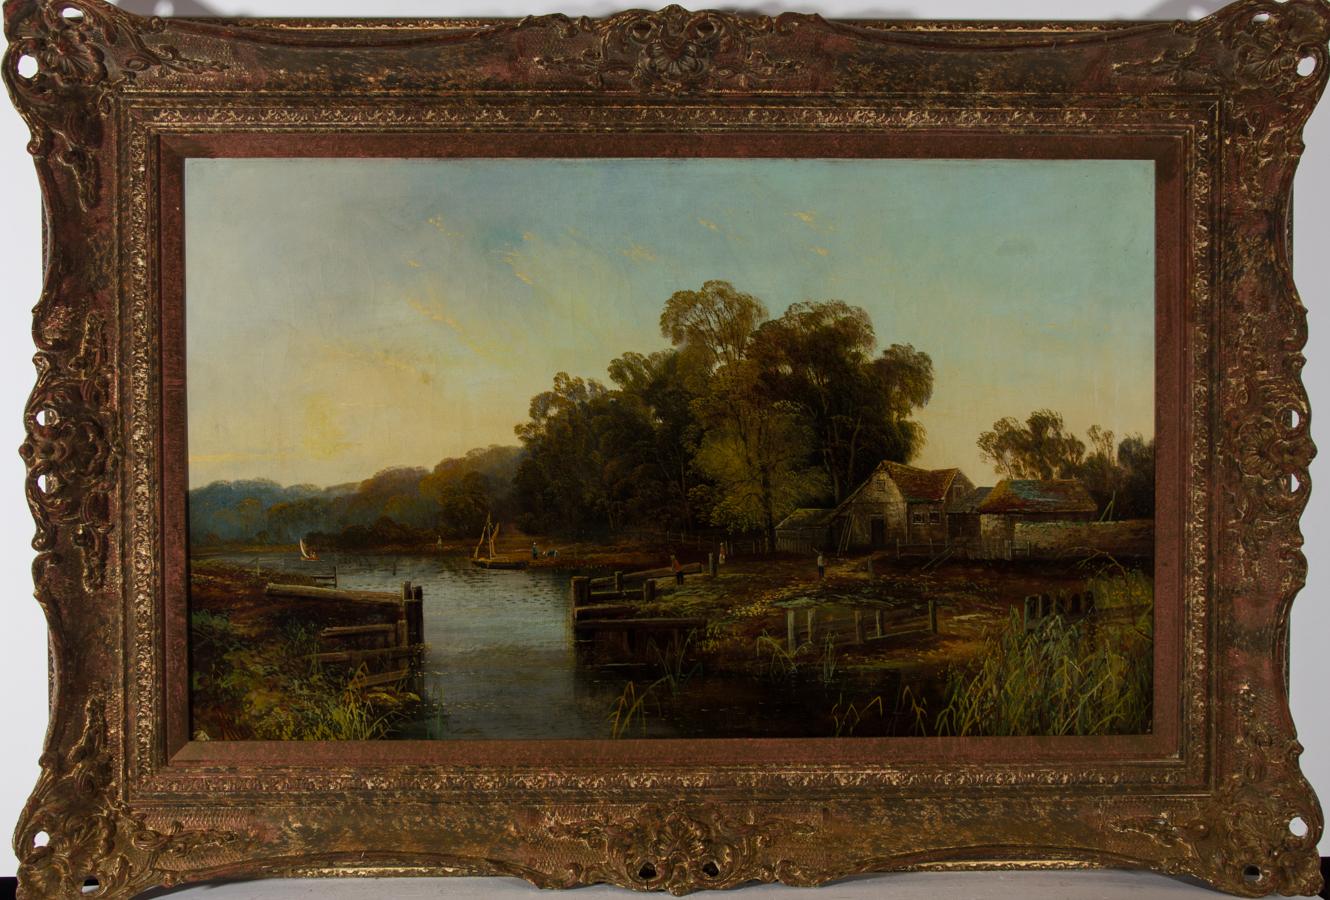 Proud to present this very fine landscape in oil, by the British listed artist Robert Weir Allan RWS (1851-1942). Allan has produced this handsome river scene in an updated Picturesque style, characteristic of artistic trends at the turn of the 20th